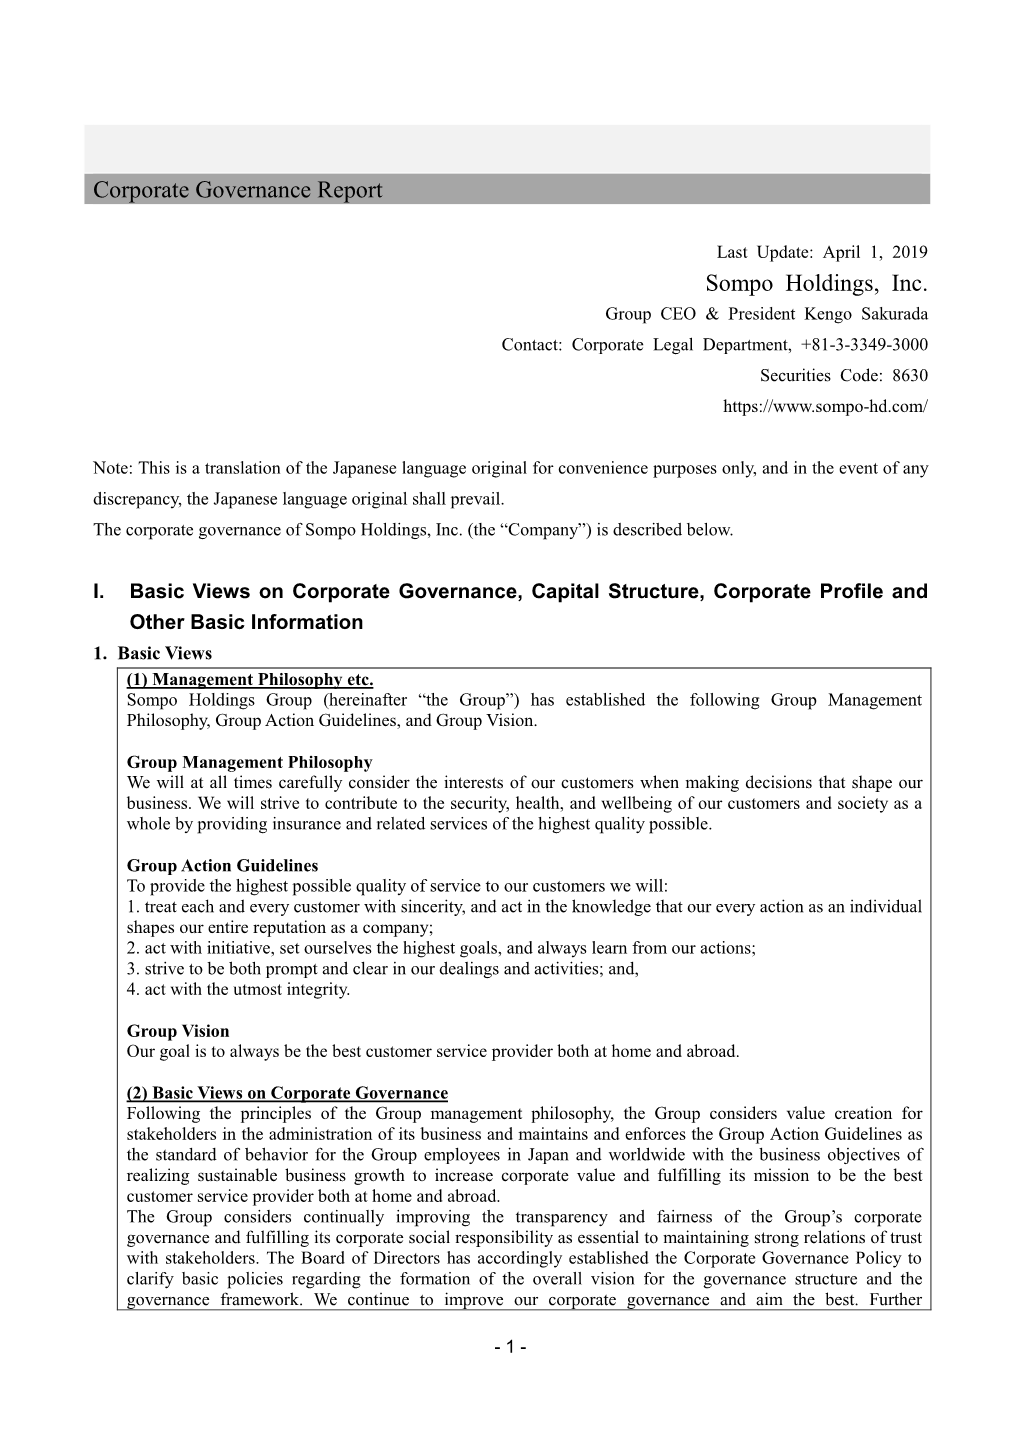 Corporate Governance Report SOMPO Holdings